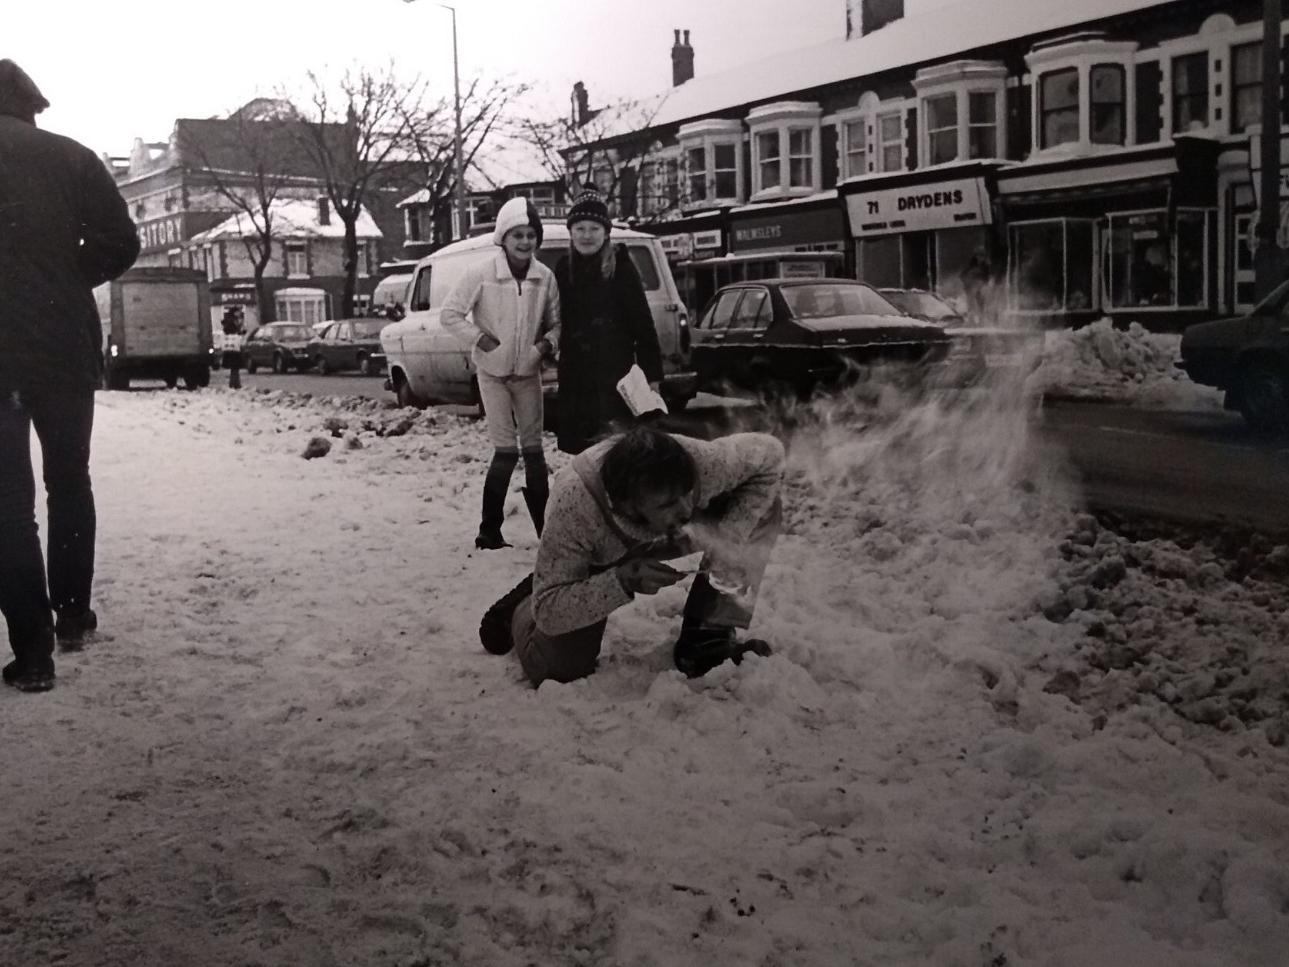 This looks was a scene on Whitegate Drive on December 19 1981